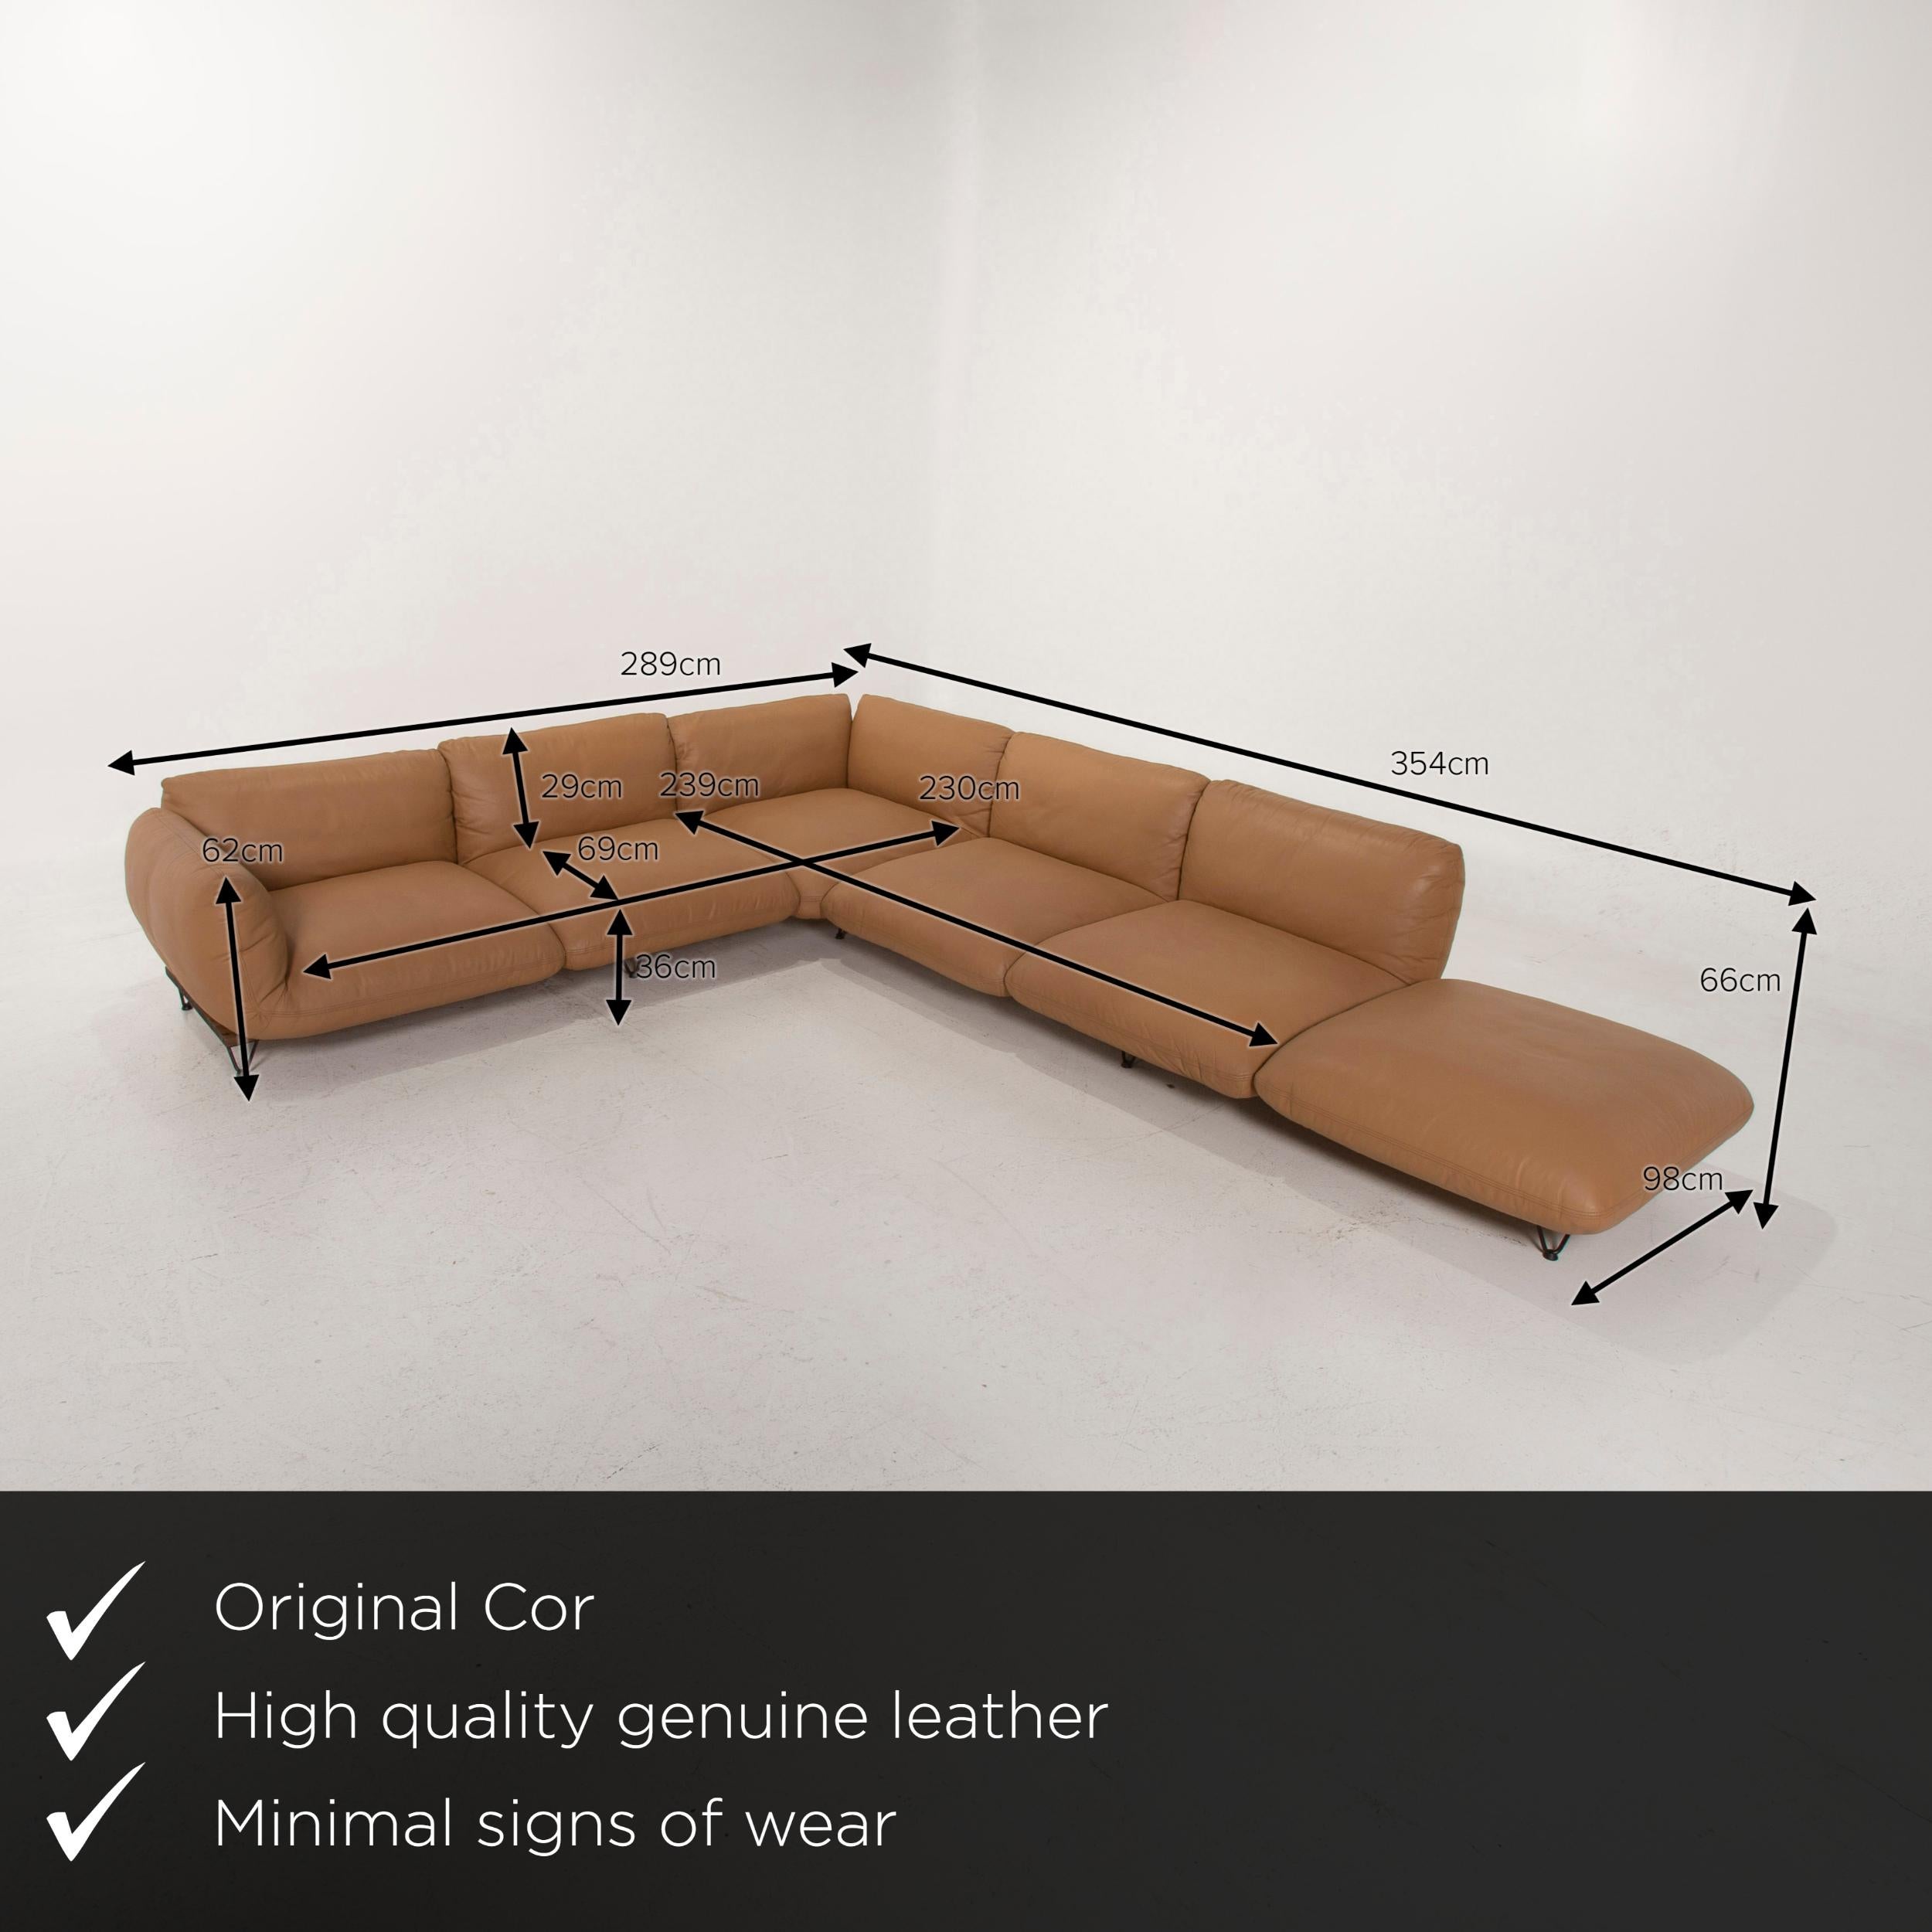 We present to you a Cor Jalis leather sofa cognac corner sofa substructure and feet by Revive.

 

 Product measurements in centimeters:
 

Depth 98
Width 289
Height 66
Seat height 36
Rest height 62
Seat depth 69
Seat width 230
Back